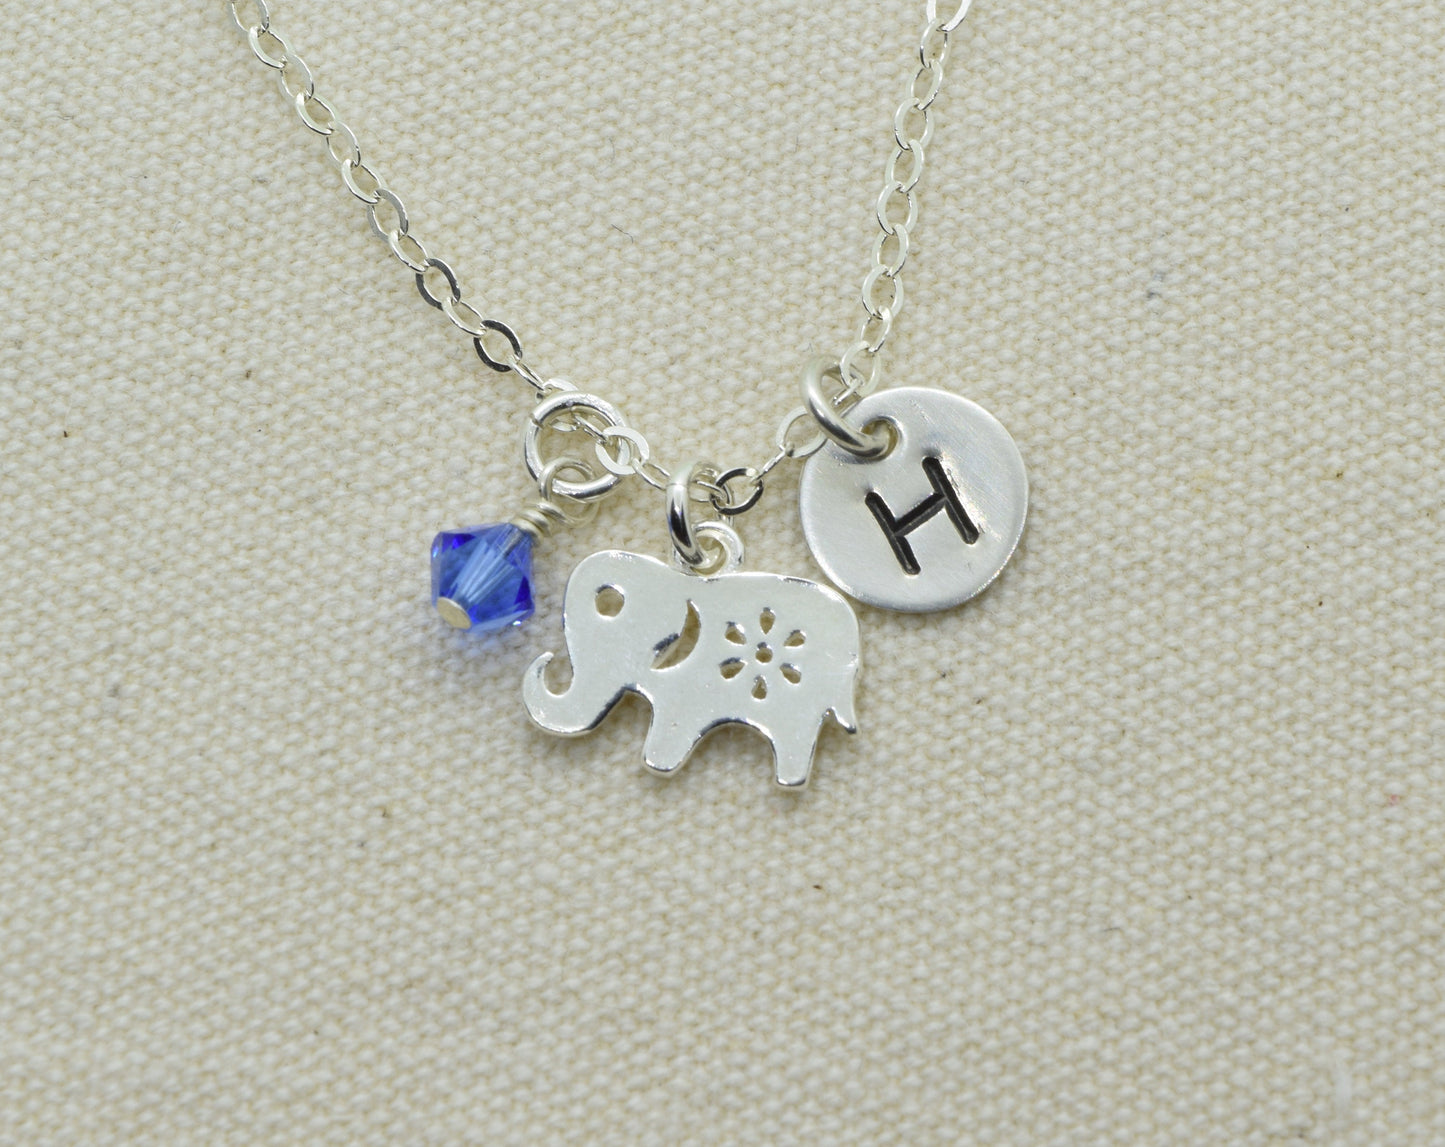 Sterling Silver Elephant Charm Necklace, Elephant Pendant, Luck Gift, Present for Friend, Simple Animal Necklace, Add Initial or Birthstone